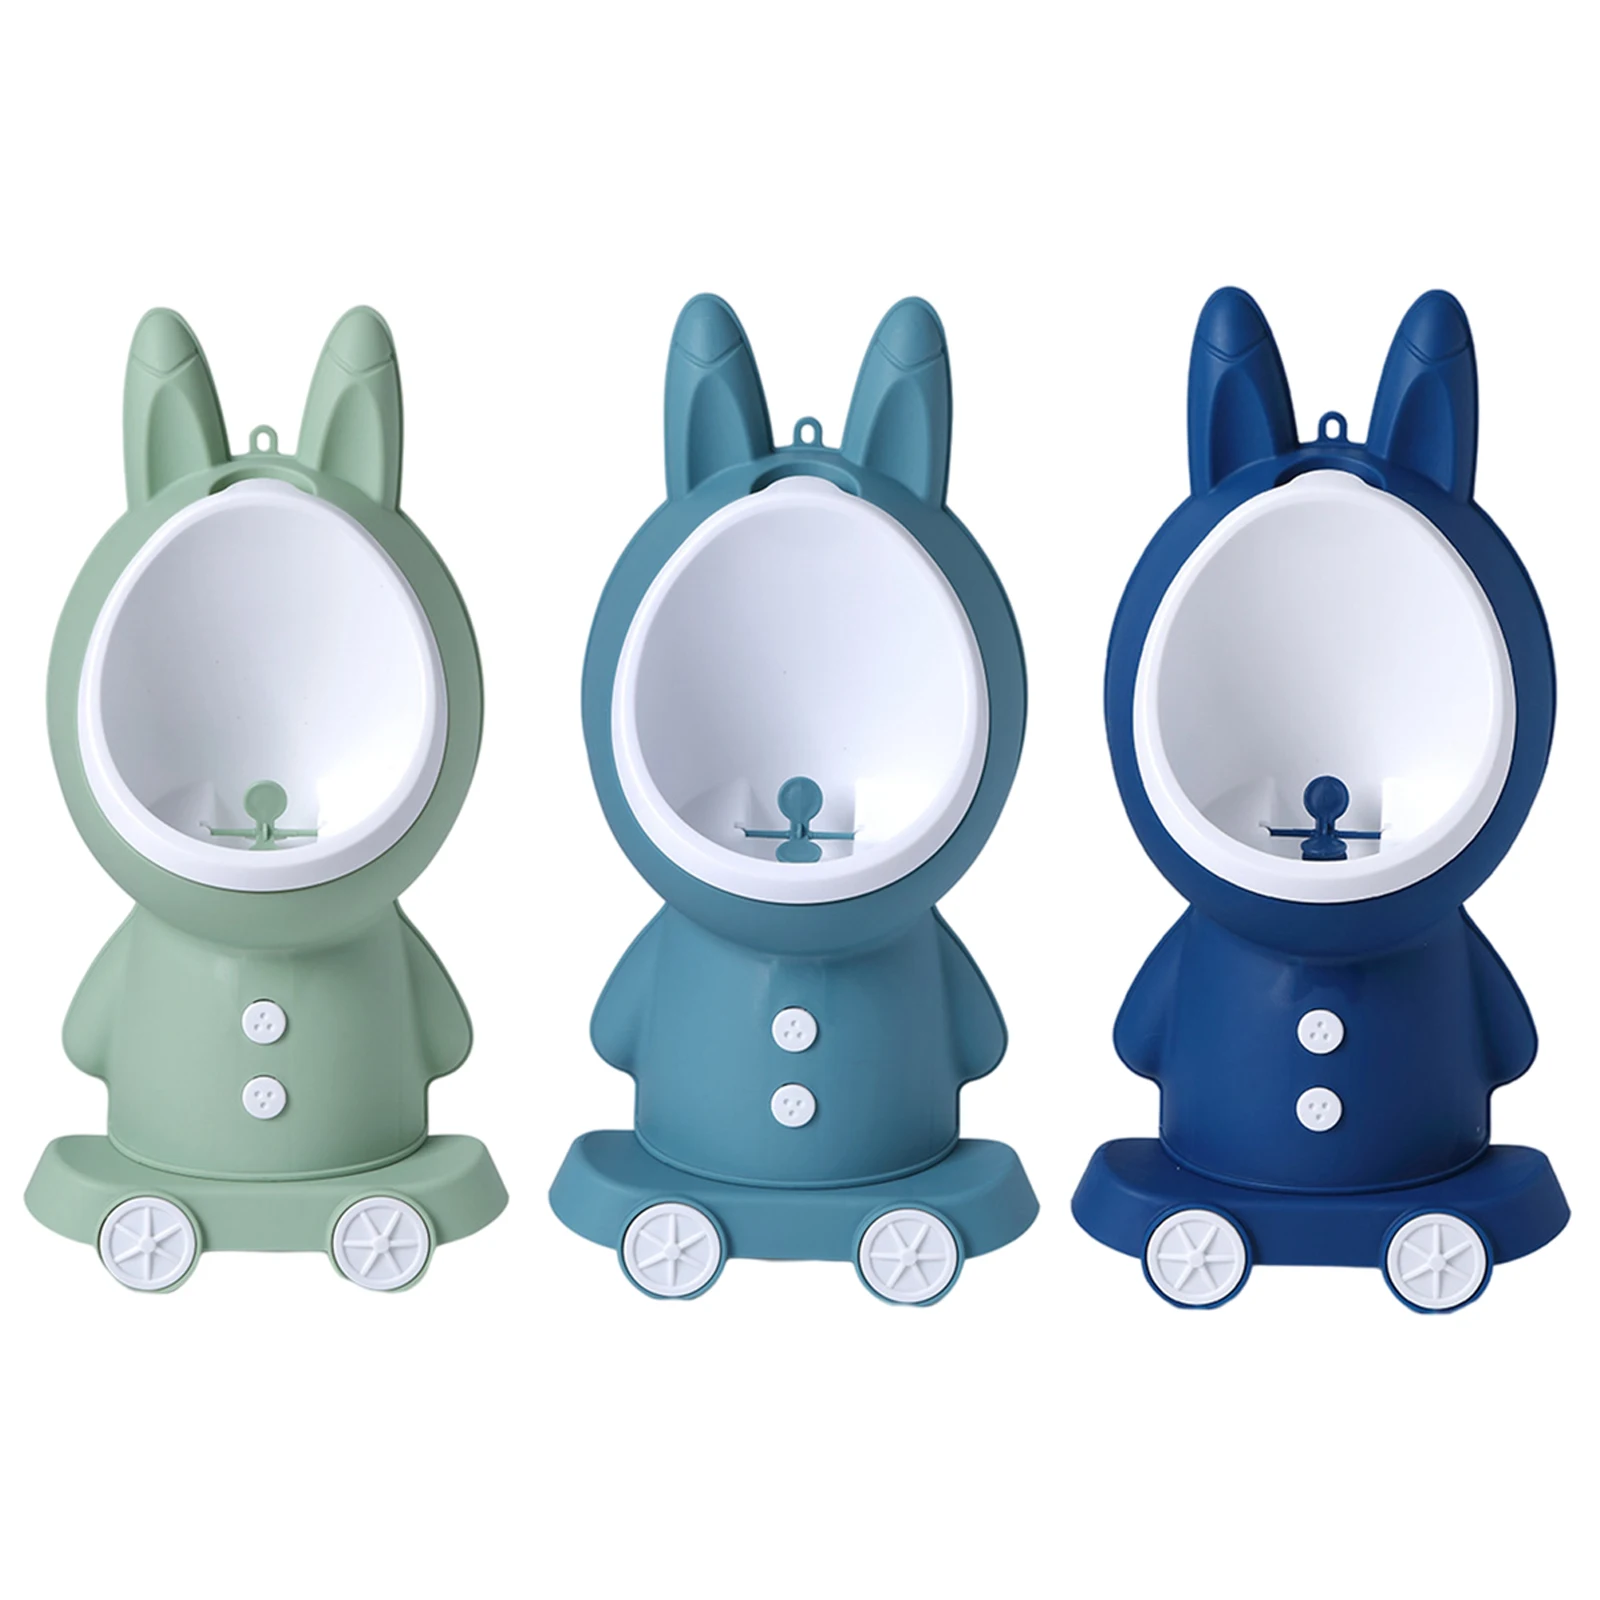 Rabbit Little Boys Potty Urinal Standing Pee Toilet with Funny Aiming Target 2 to 6 Years Old for Pee Trainer